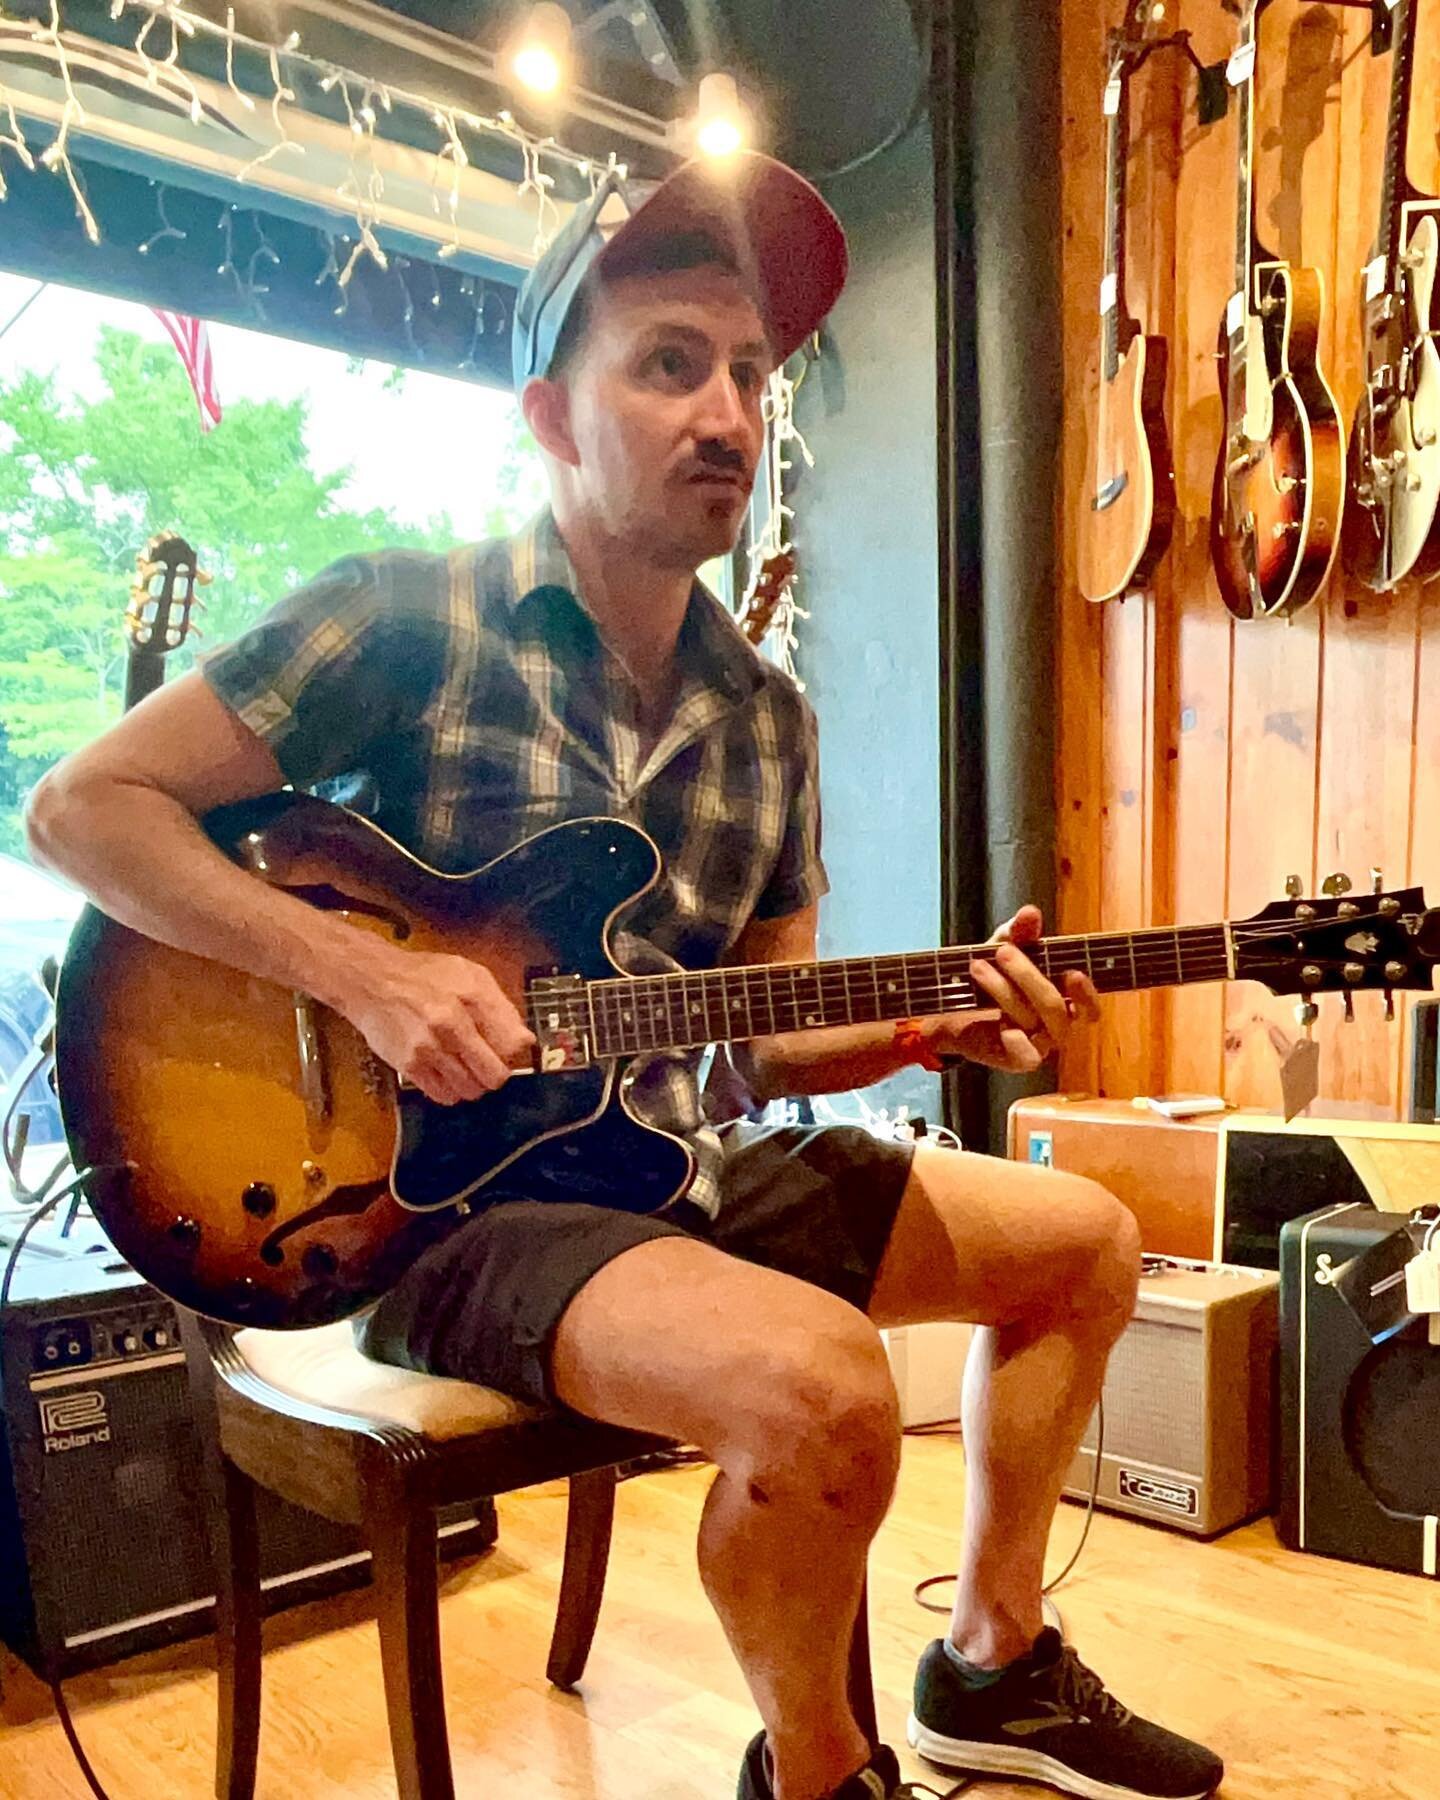 16 july 2022
rudy&rsquo;s music, scarsdale, new york
⠀⠀⠀⠀⠀⠀⠀⠀⠀
great trip to @rudysmusic in scarsdale yesterday. played a bunch of awesome instruments and came home with this new friend!
⠀⠀⠀⠀⠀⠀⠀⠀⠀
⠀⠀⠀⠀⠀⠀⠀⠀⠀
#rudysmusic #rudysmusicscarsdale #newguitar